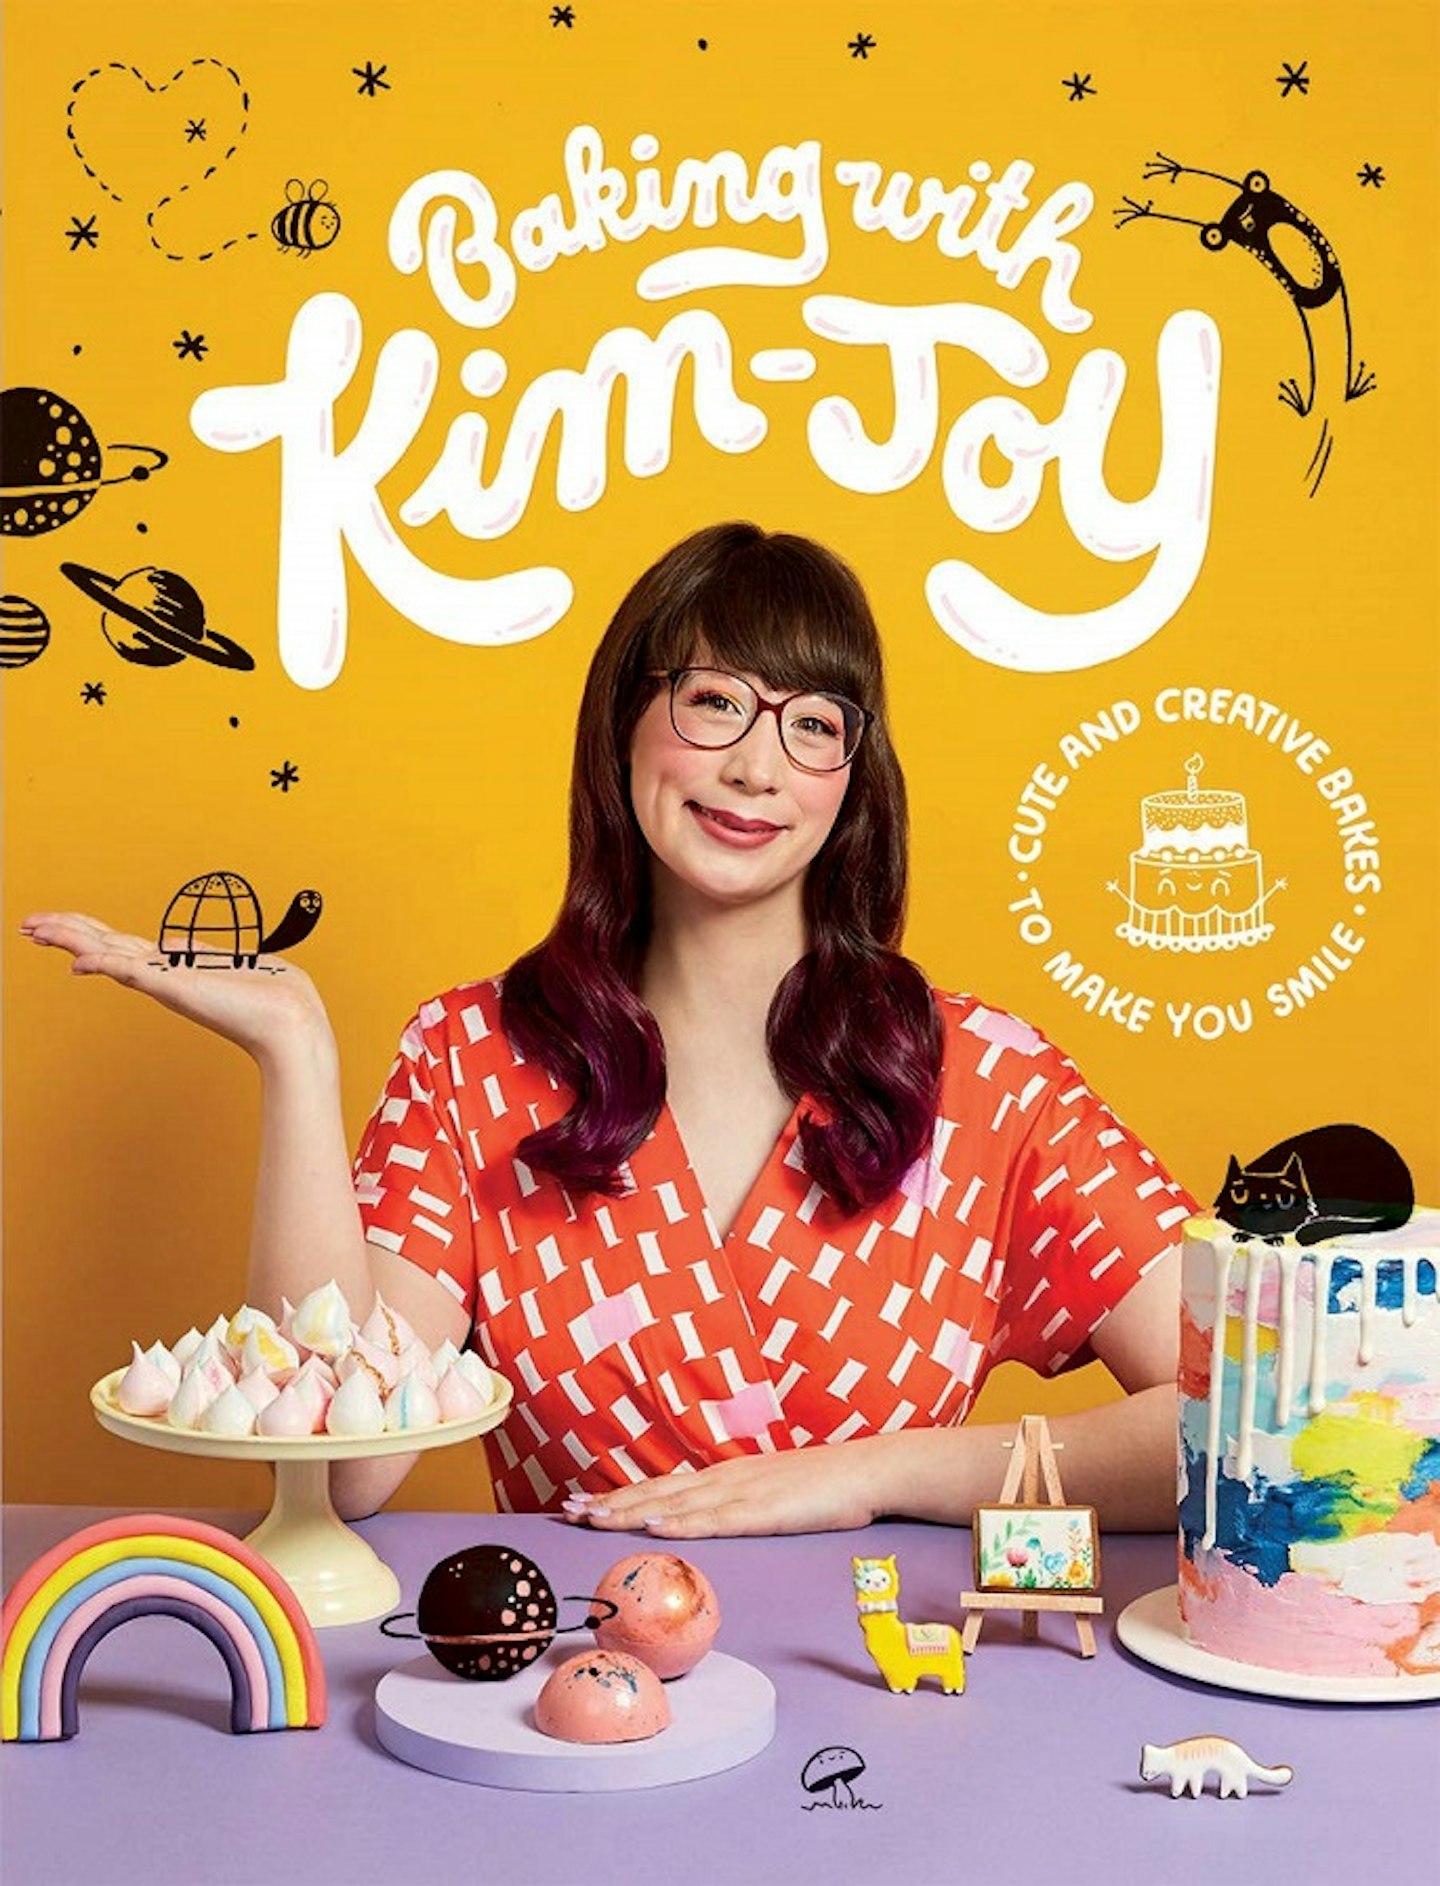 Baking with Kim-Joy: Cute and creative bakes to make you smile, 10.81